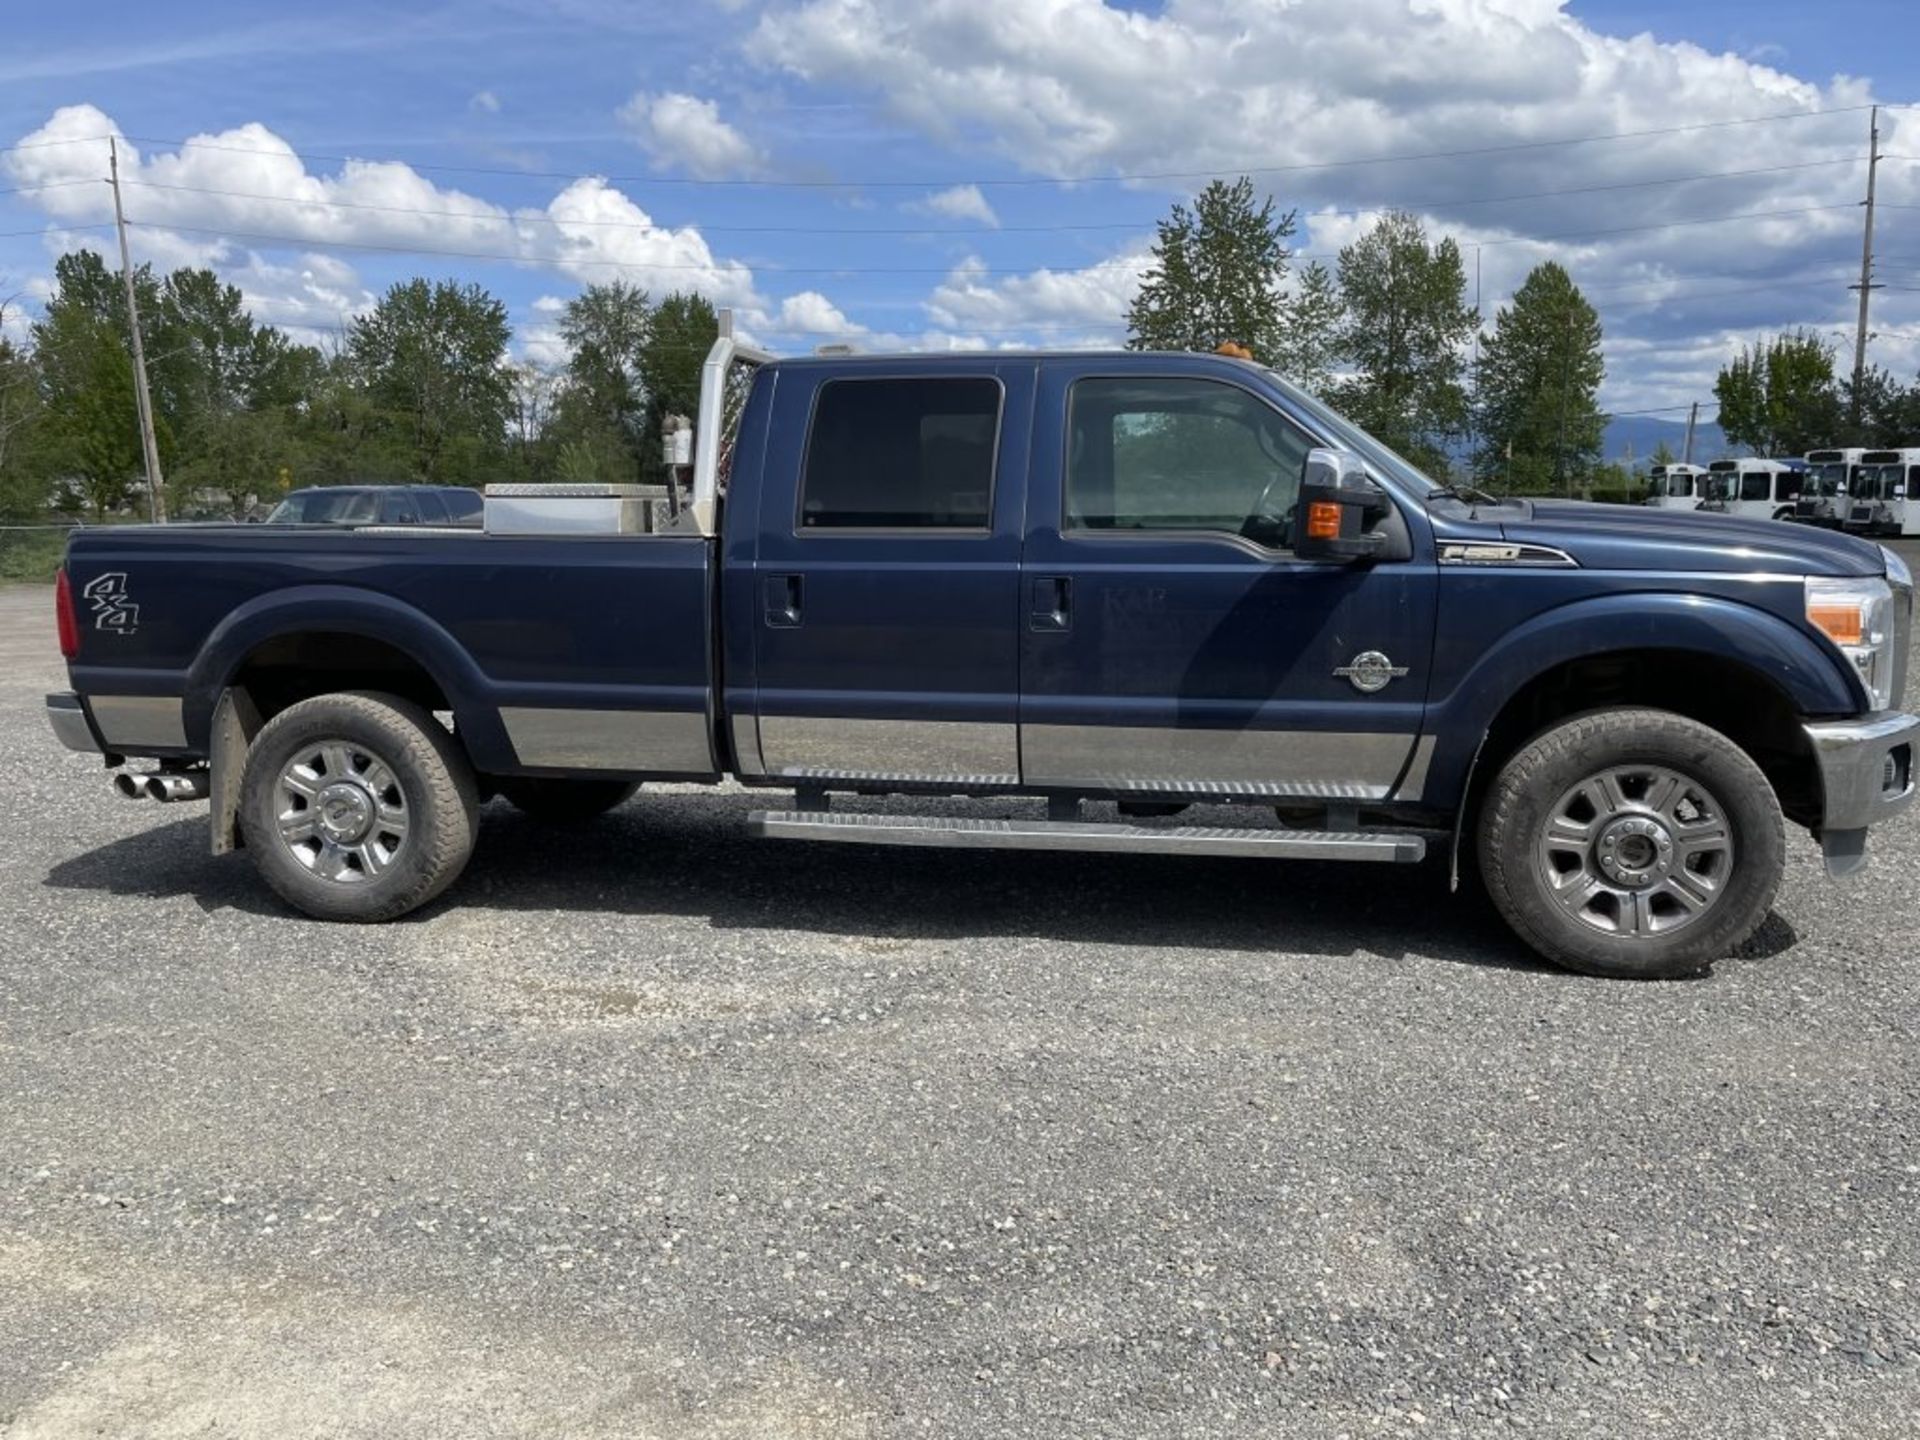 2014 Ford F350 SD Crew Cab 4x4 Pickup - Image 3 of 47